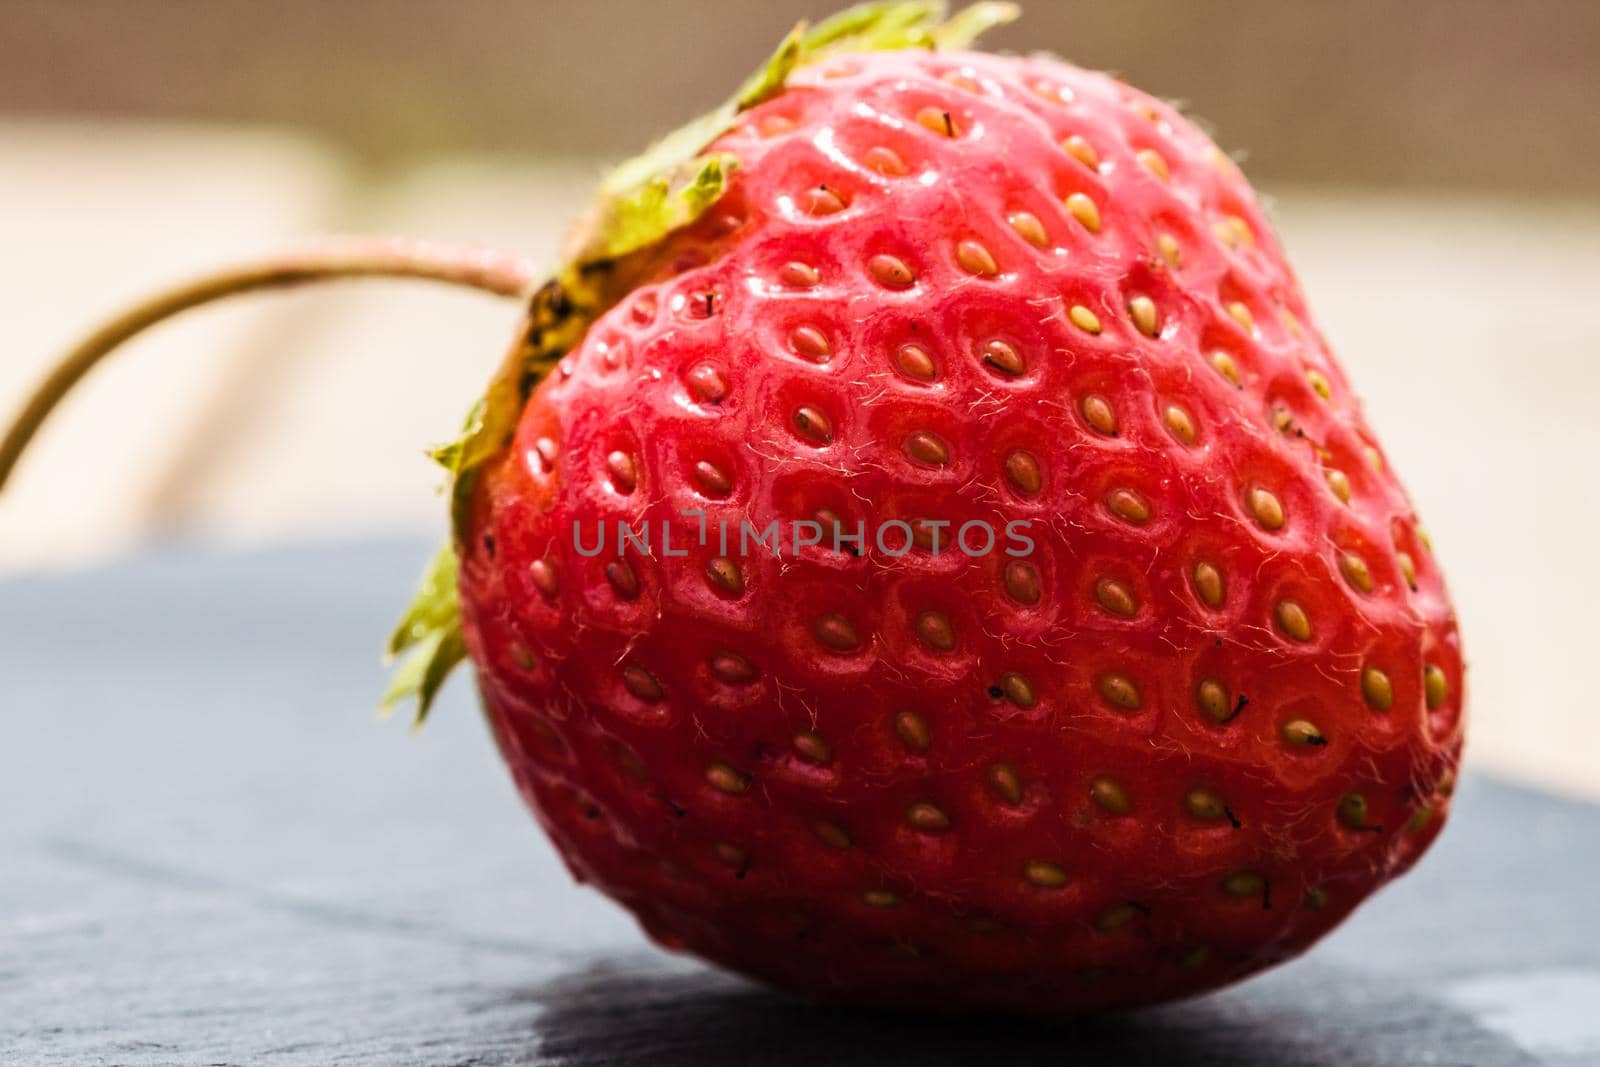 Close up of fresh strawberry showing seeds achenes. Details of a fresh ripe red strawberry.